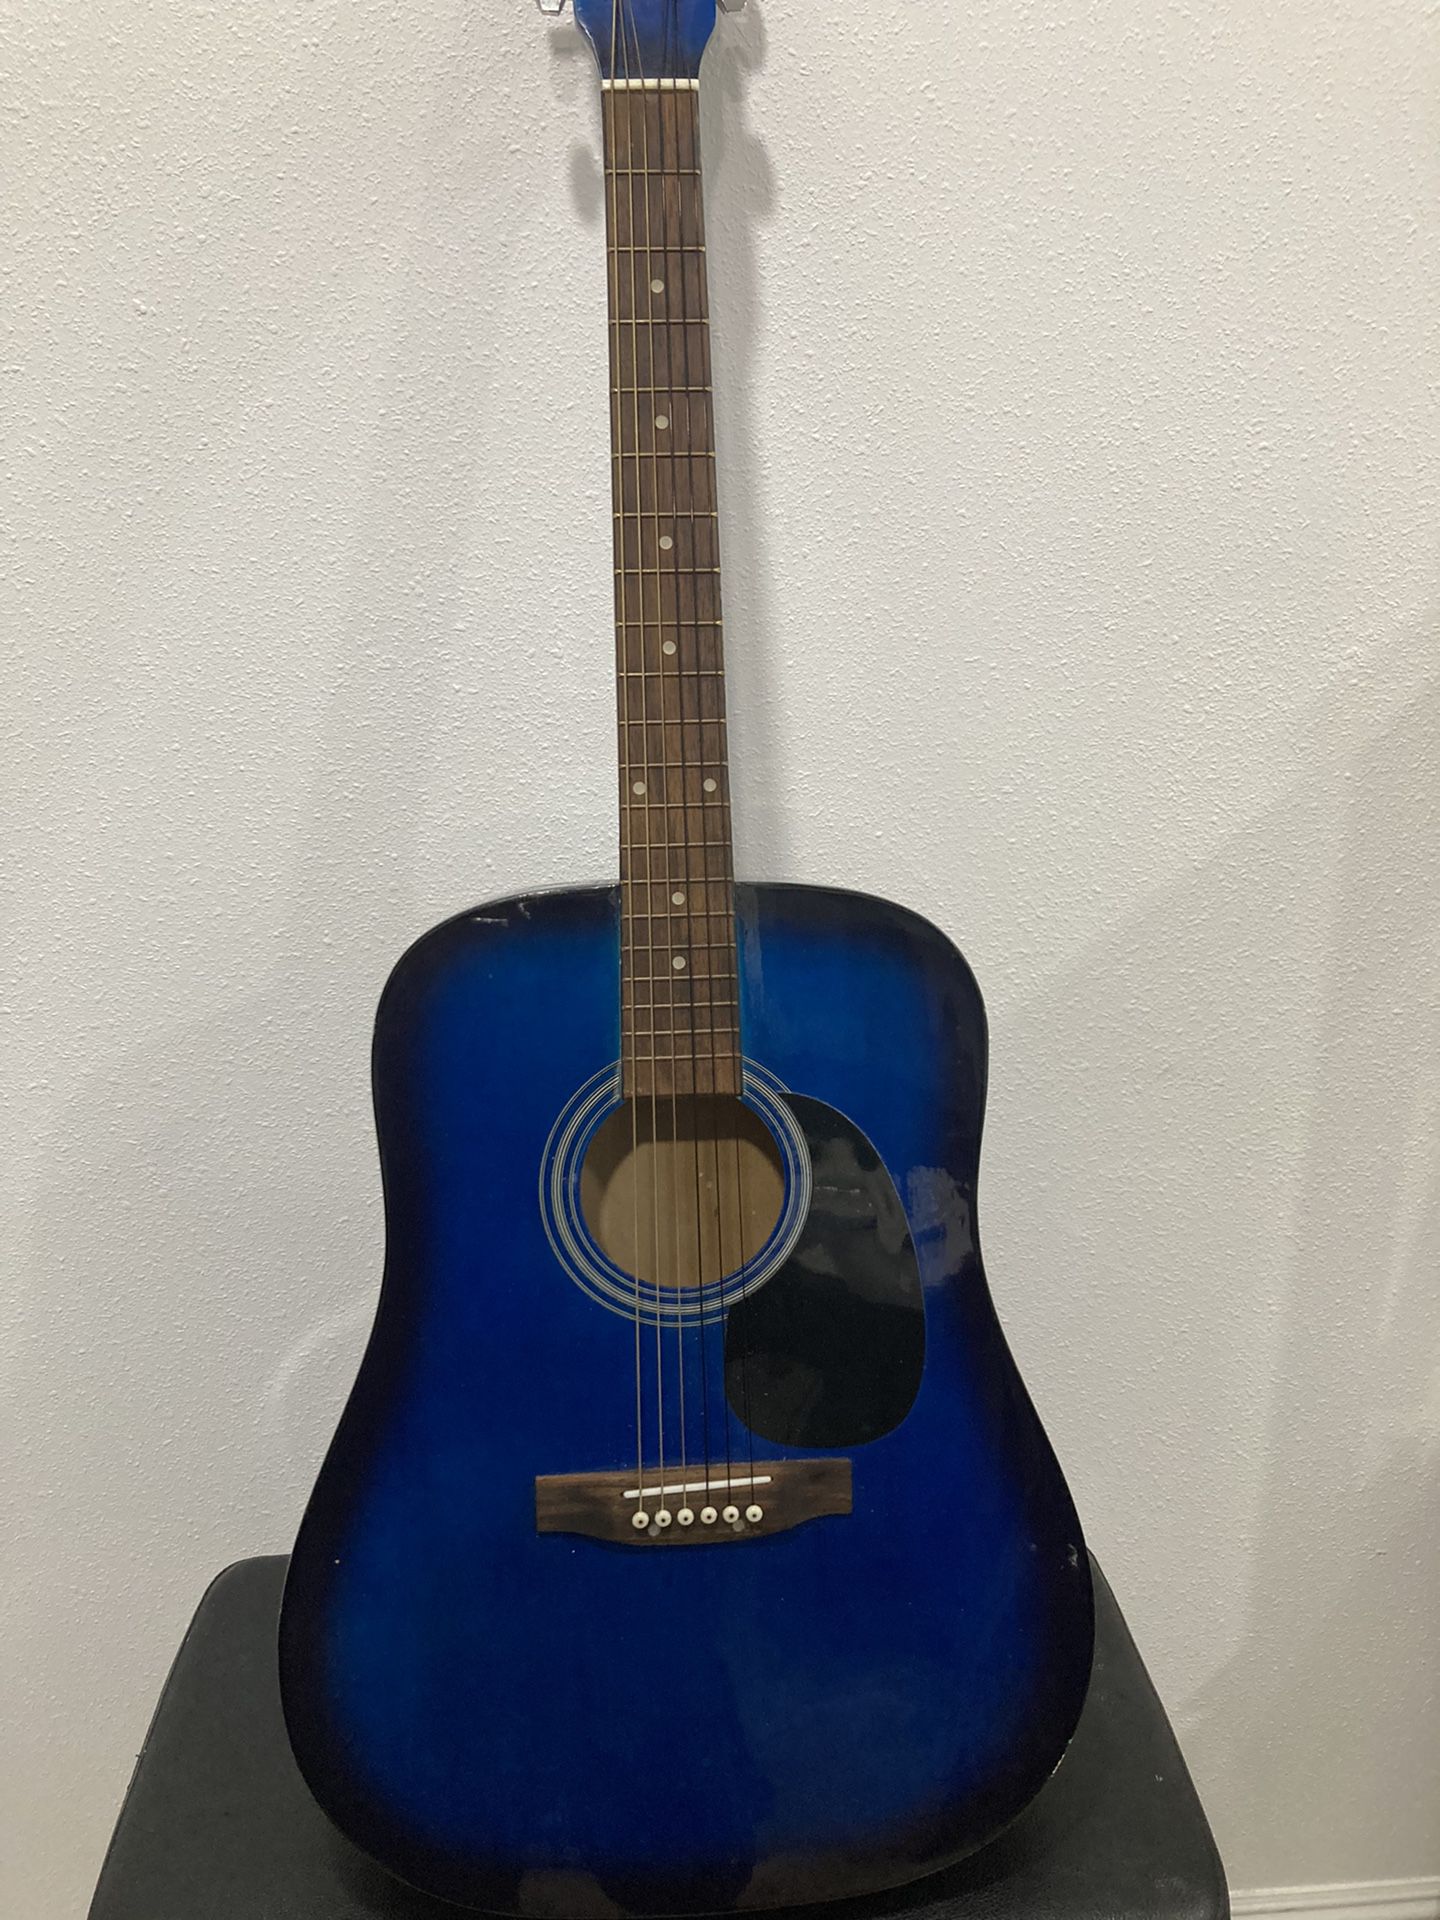 Acoustic Guitar Great Condition $50